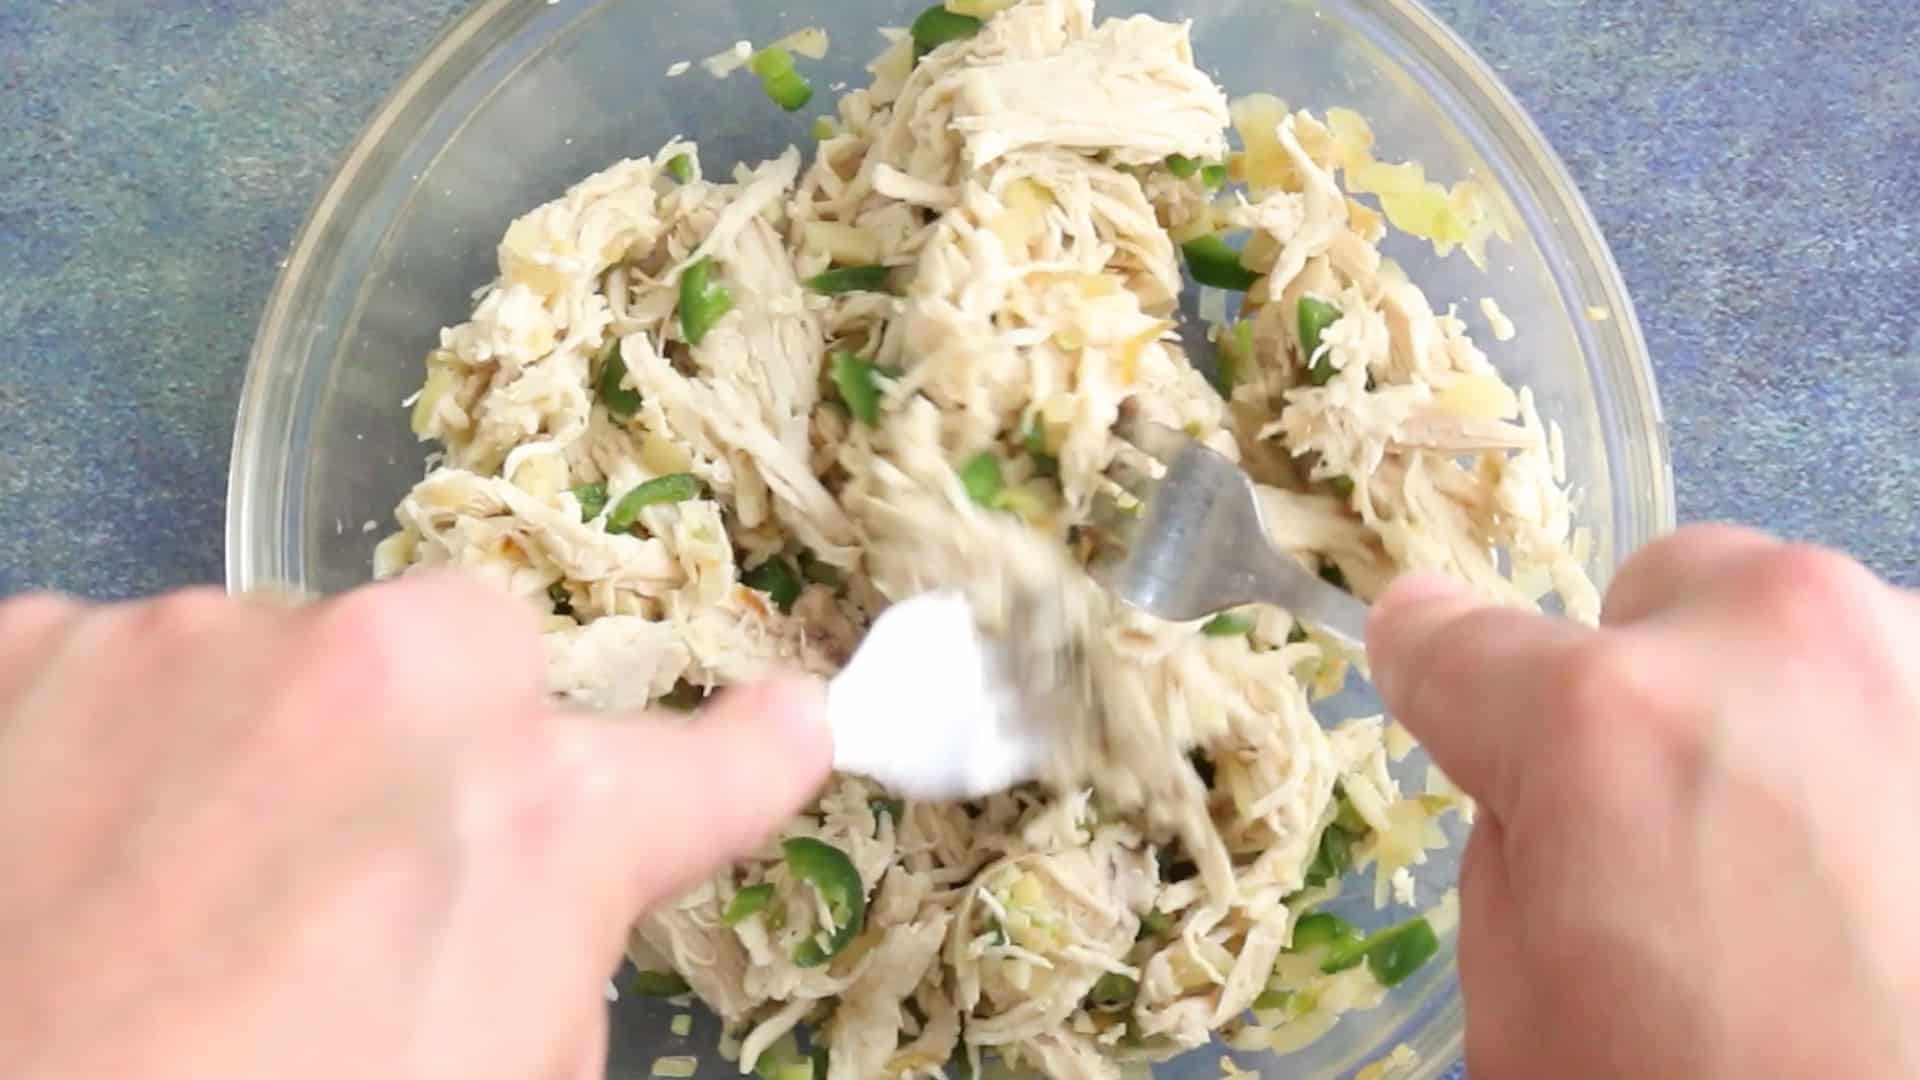 Shredding the poached chicken along with cooked peppers and onions.